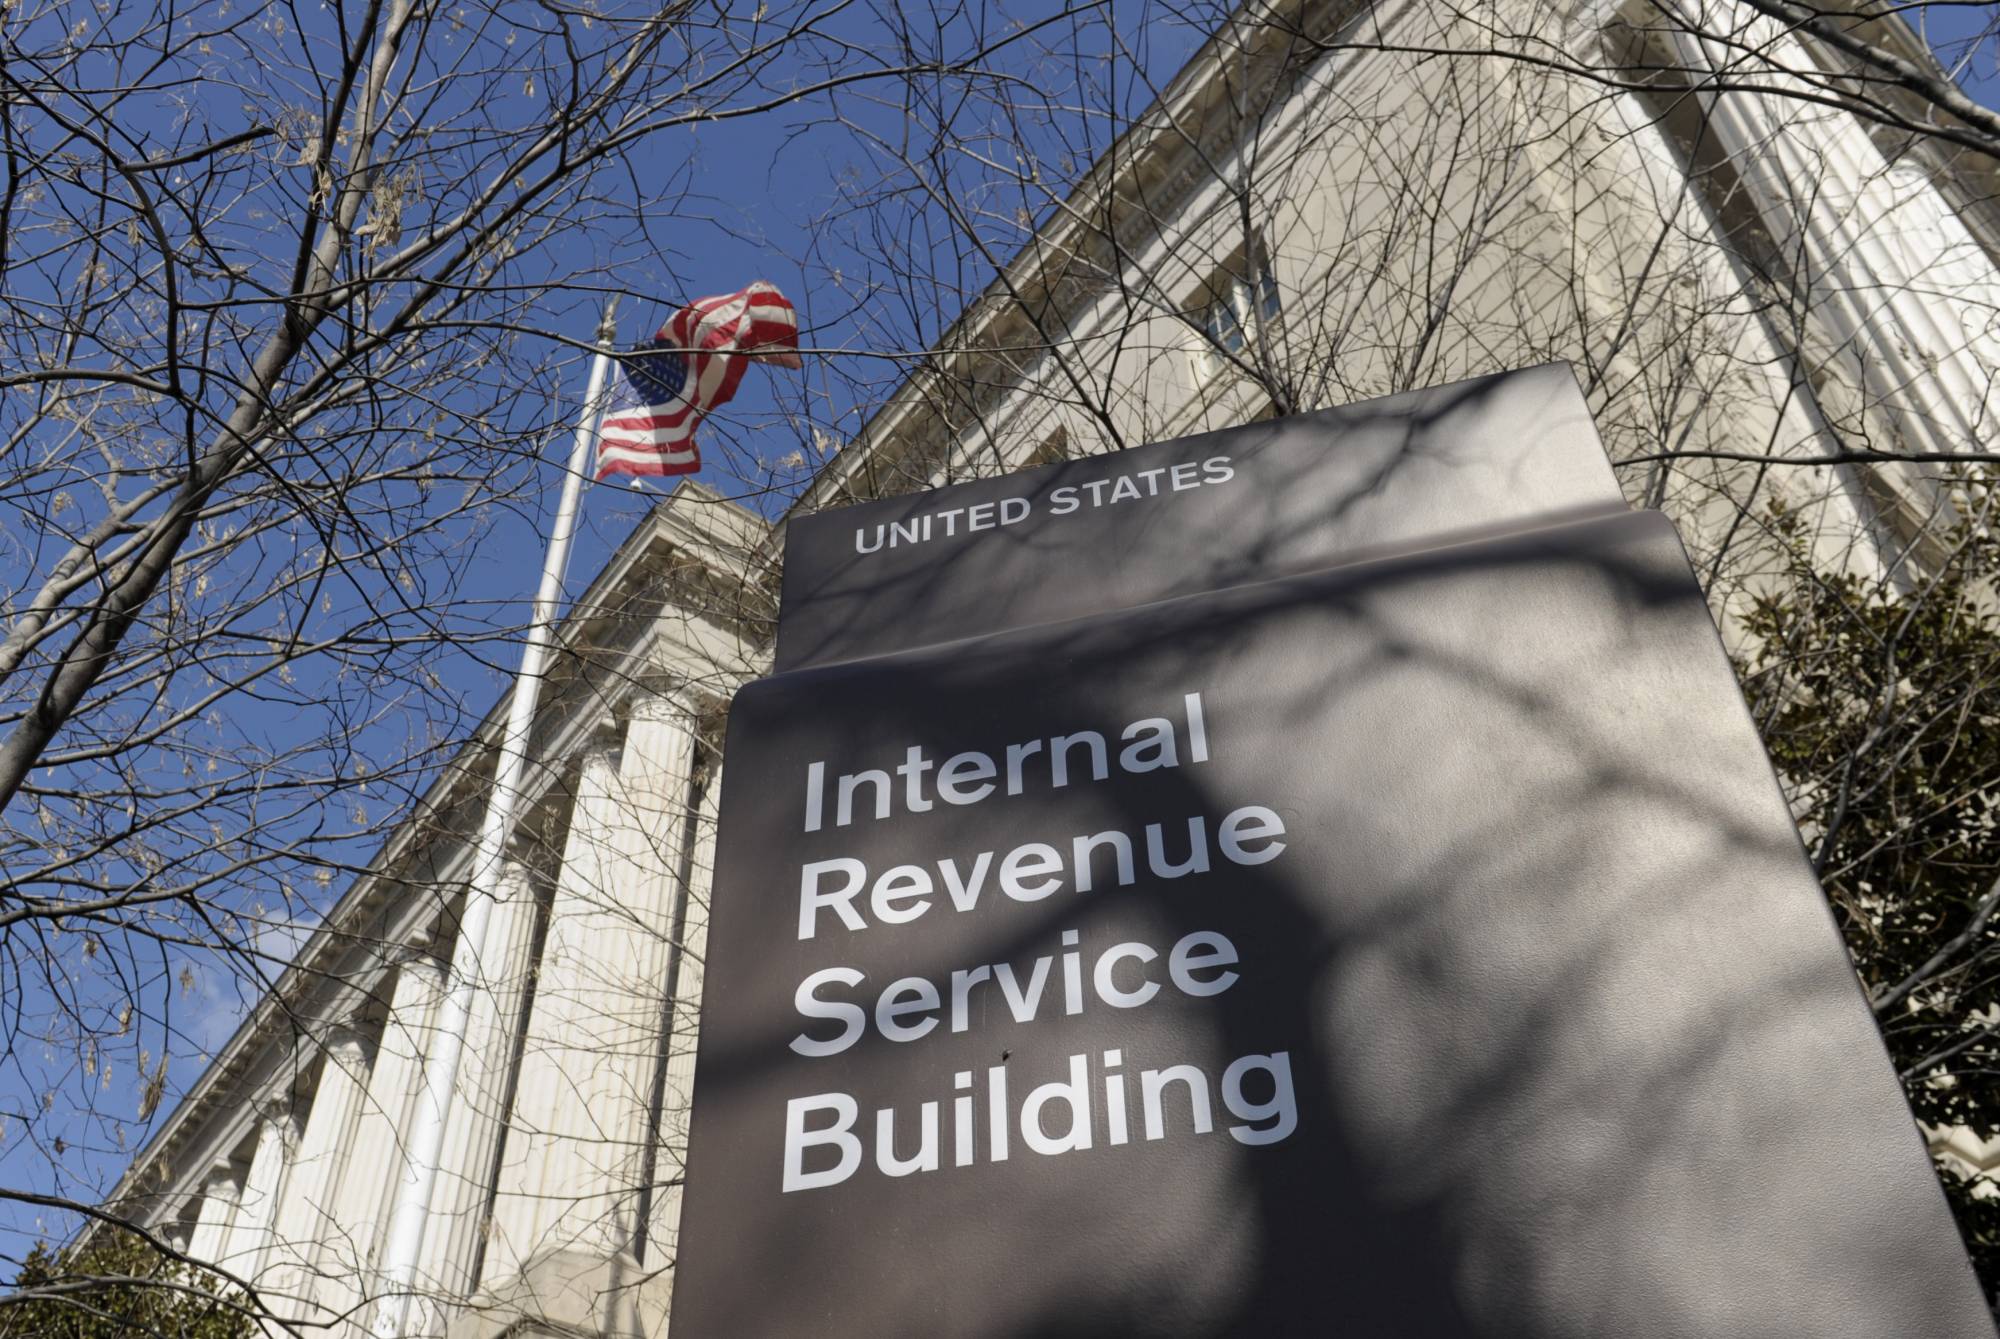 FILE - In this March 22, 2013 file photo, the exterior of the Internal Revenue Service building in Washington. As millions of Americans file their income tax returns, their chances of getting audited by the IRS have rarely been so low. The number of people audited by the IRS last year dropped for the sixth straight year, to just over 1 million. The last time so few people were audited was 2004, when the population was significantly smaller.  (AP Photo/Susan Walsh, File)